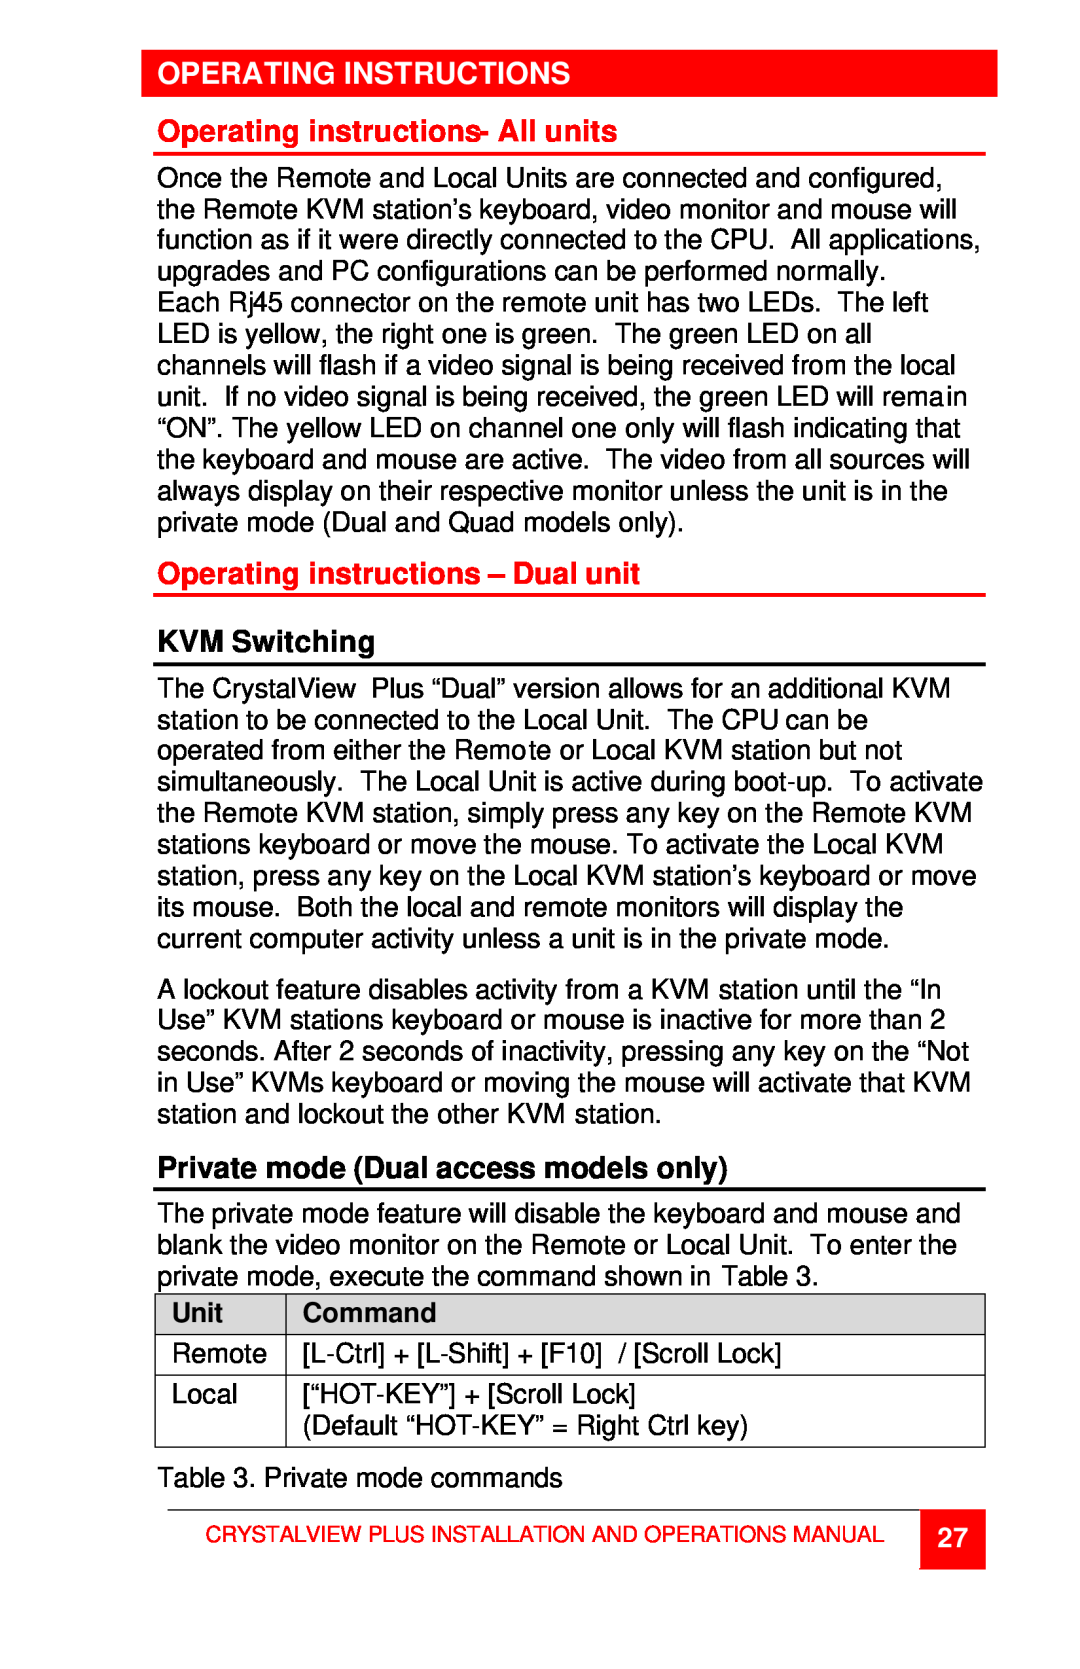 Rose electronic CrystalView Plus Operating Instructions, Operating instructions- All units, KVM Switching, Unit, Command 